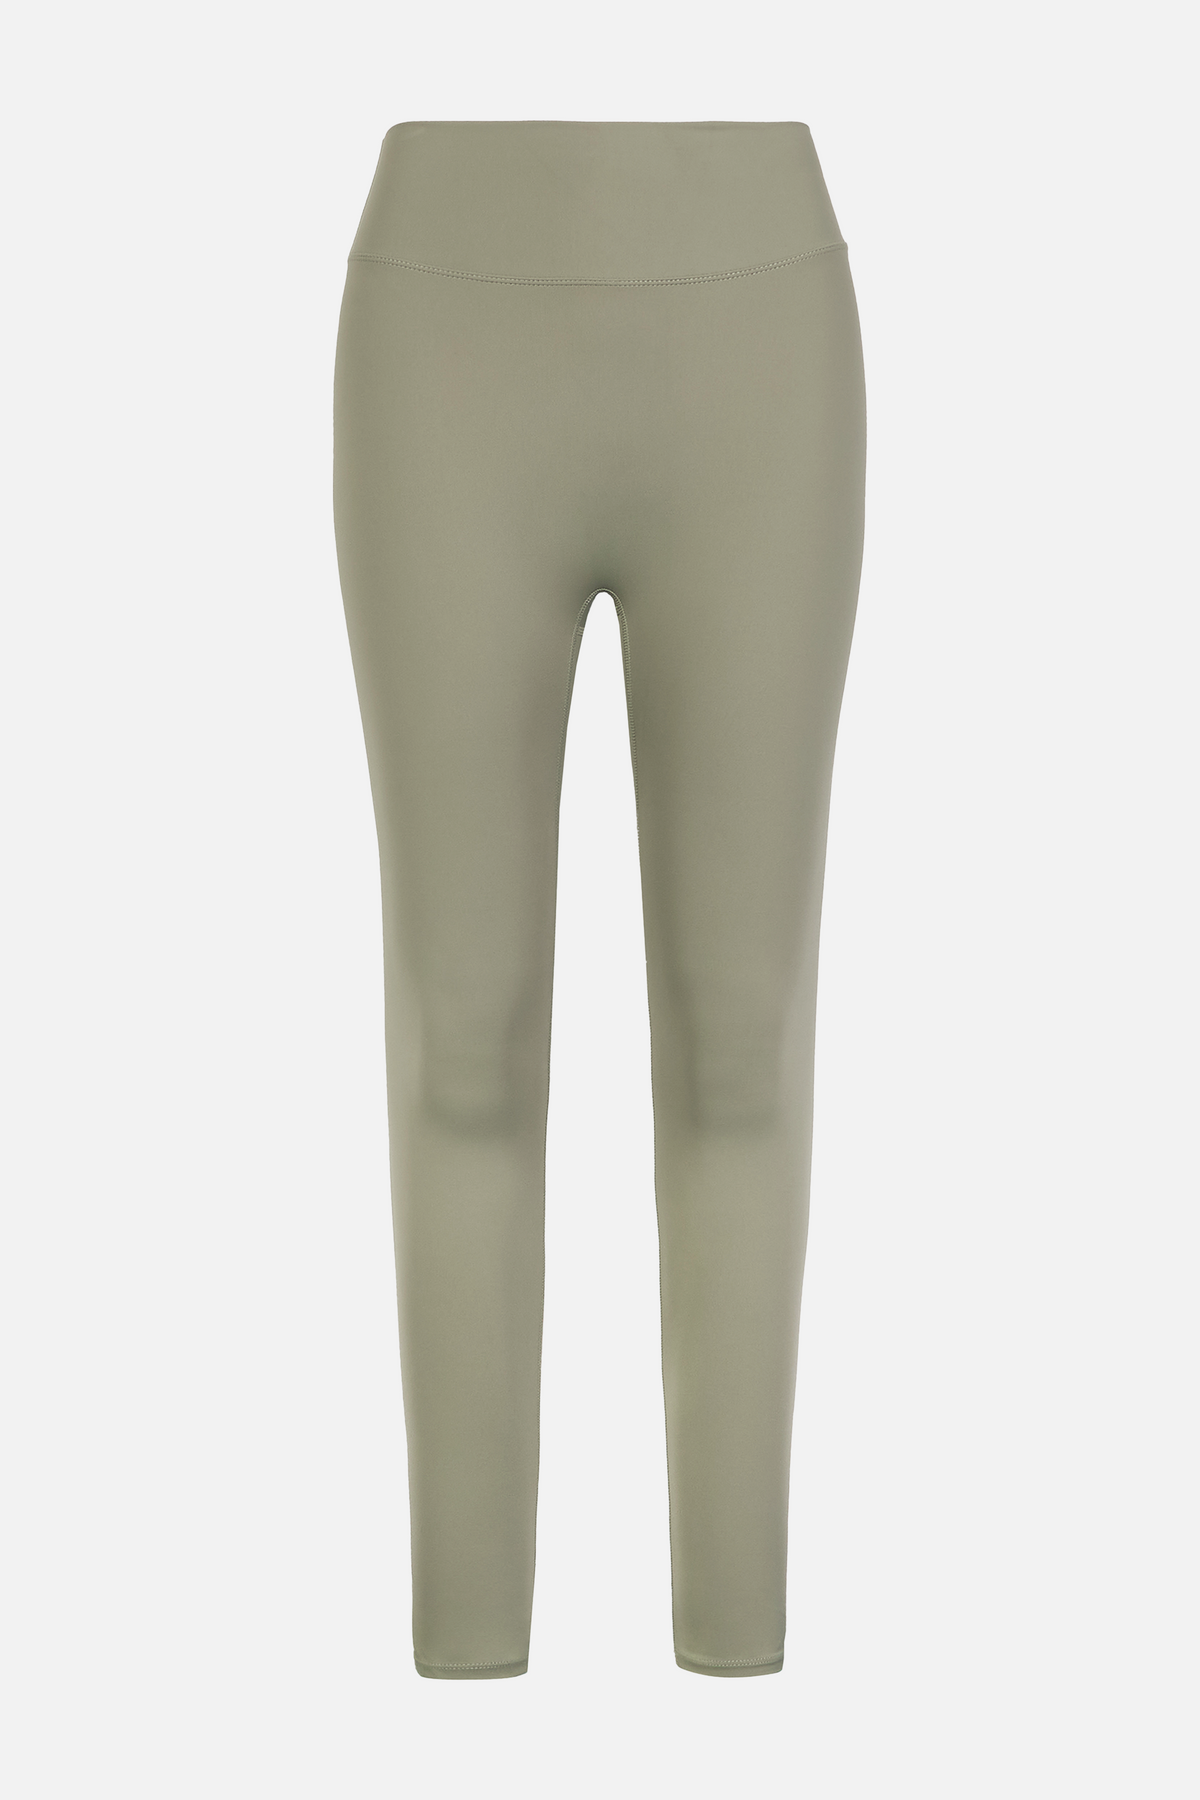 Built with our signature LAICALUX fabric, this pair of leggings is